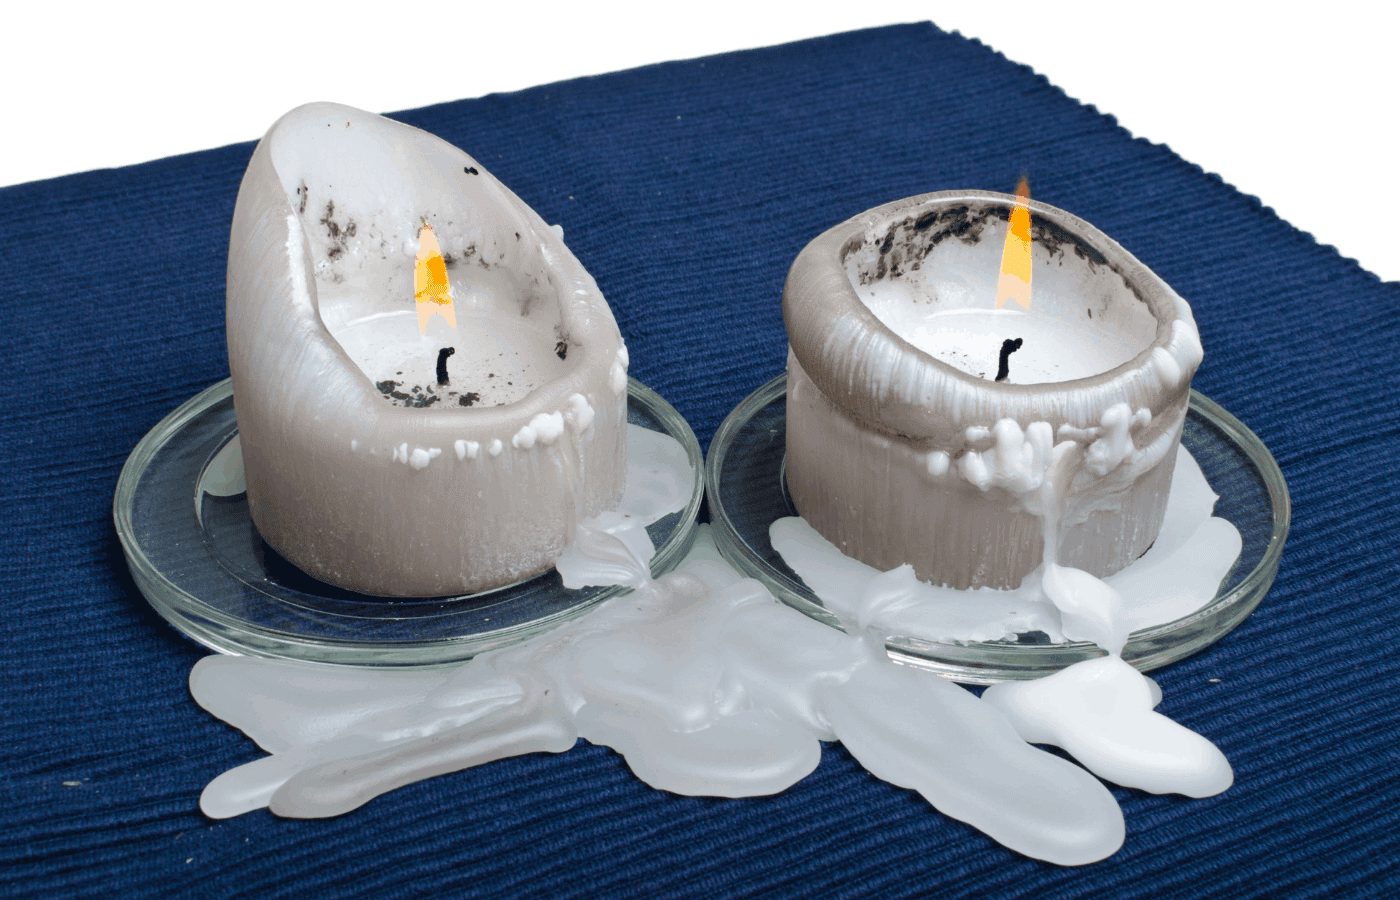 can candle wax get moldy